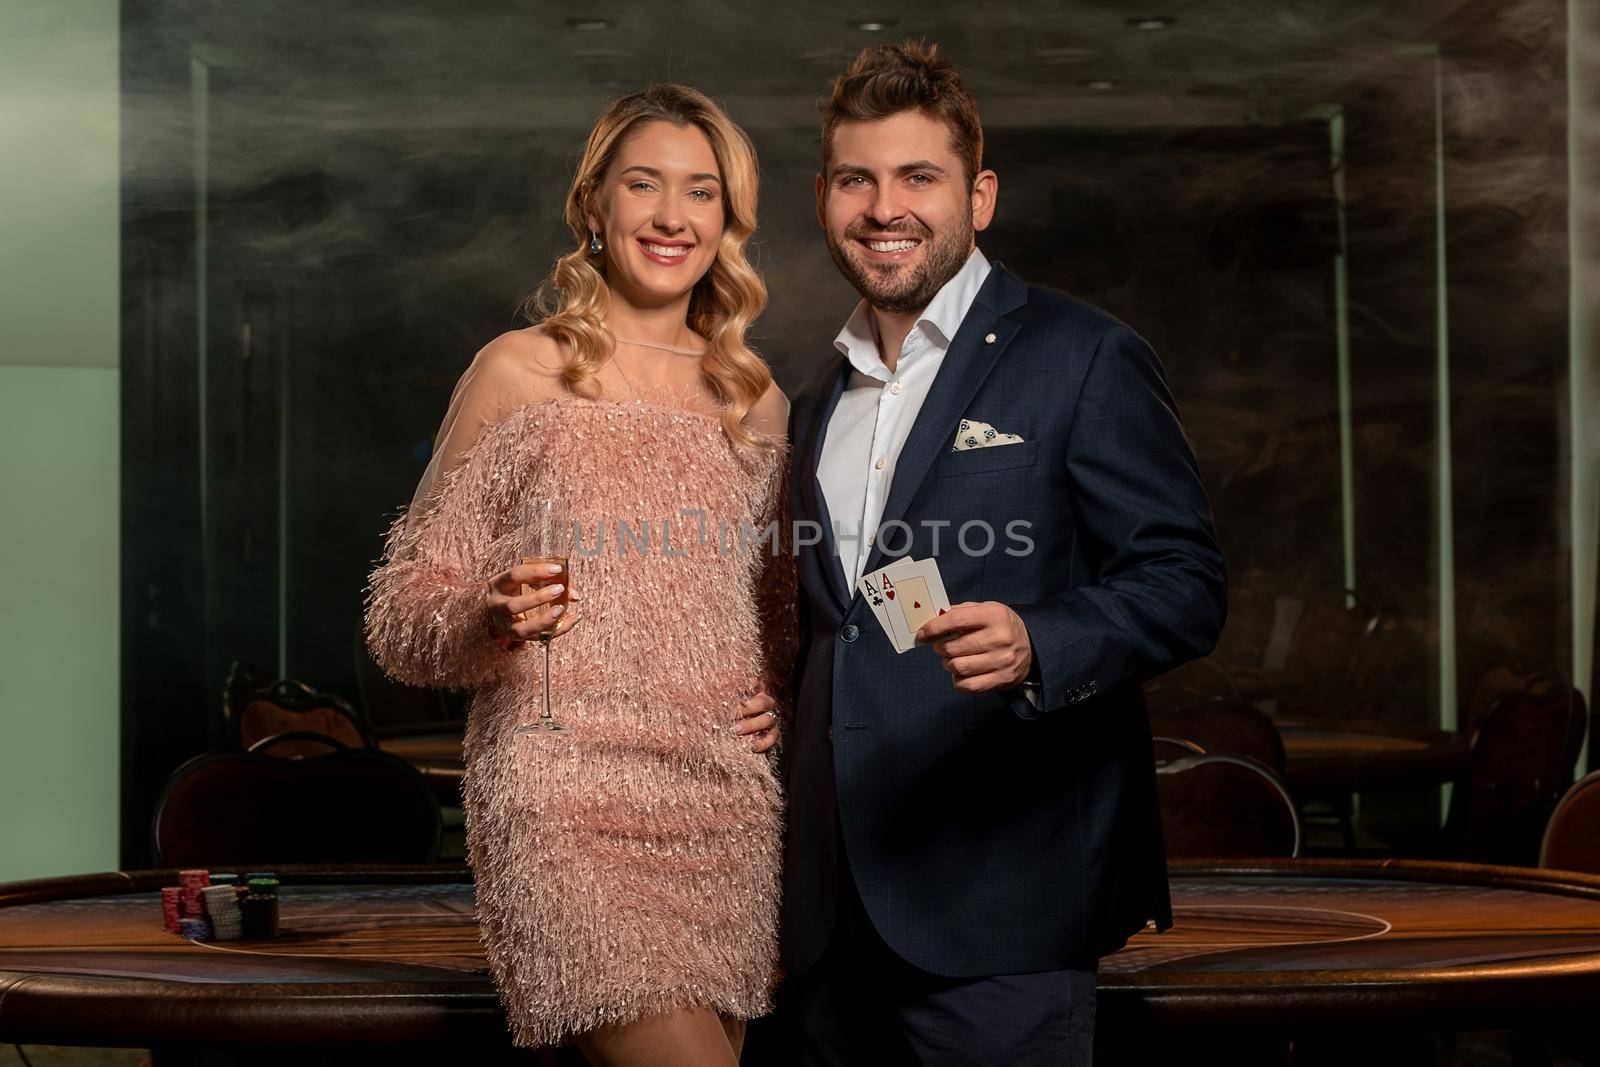 Happy young elegant couple posing in casino near poker table. Smiling woman holding glass of champagne, cheerful man showing winning card set of pair of aces. Gambling concept